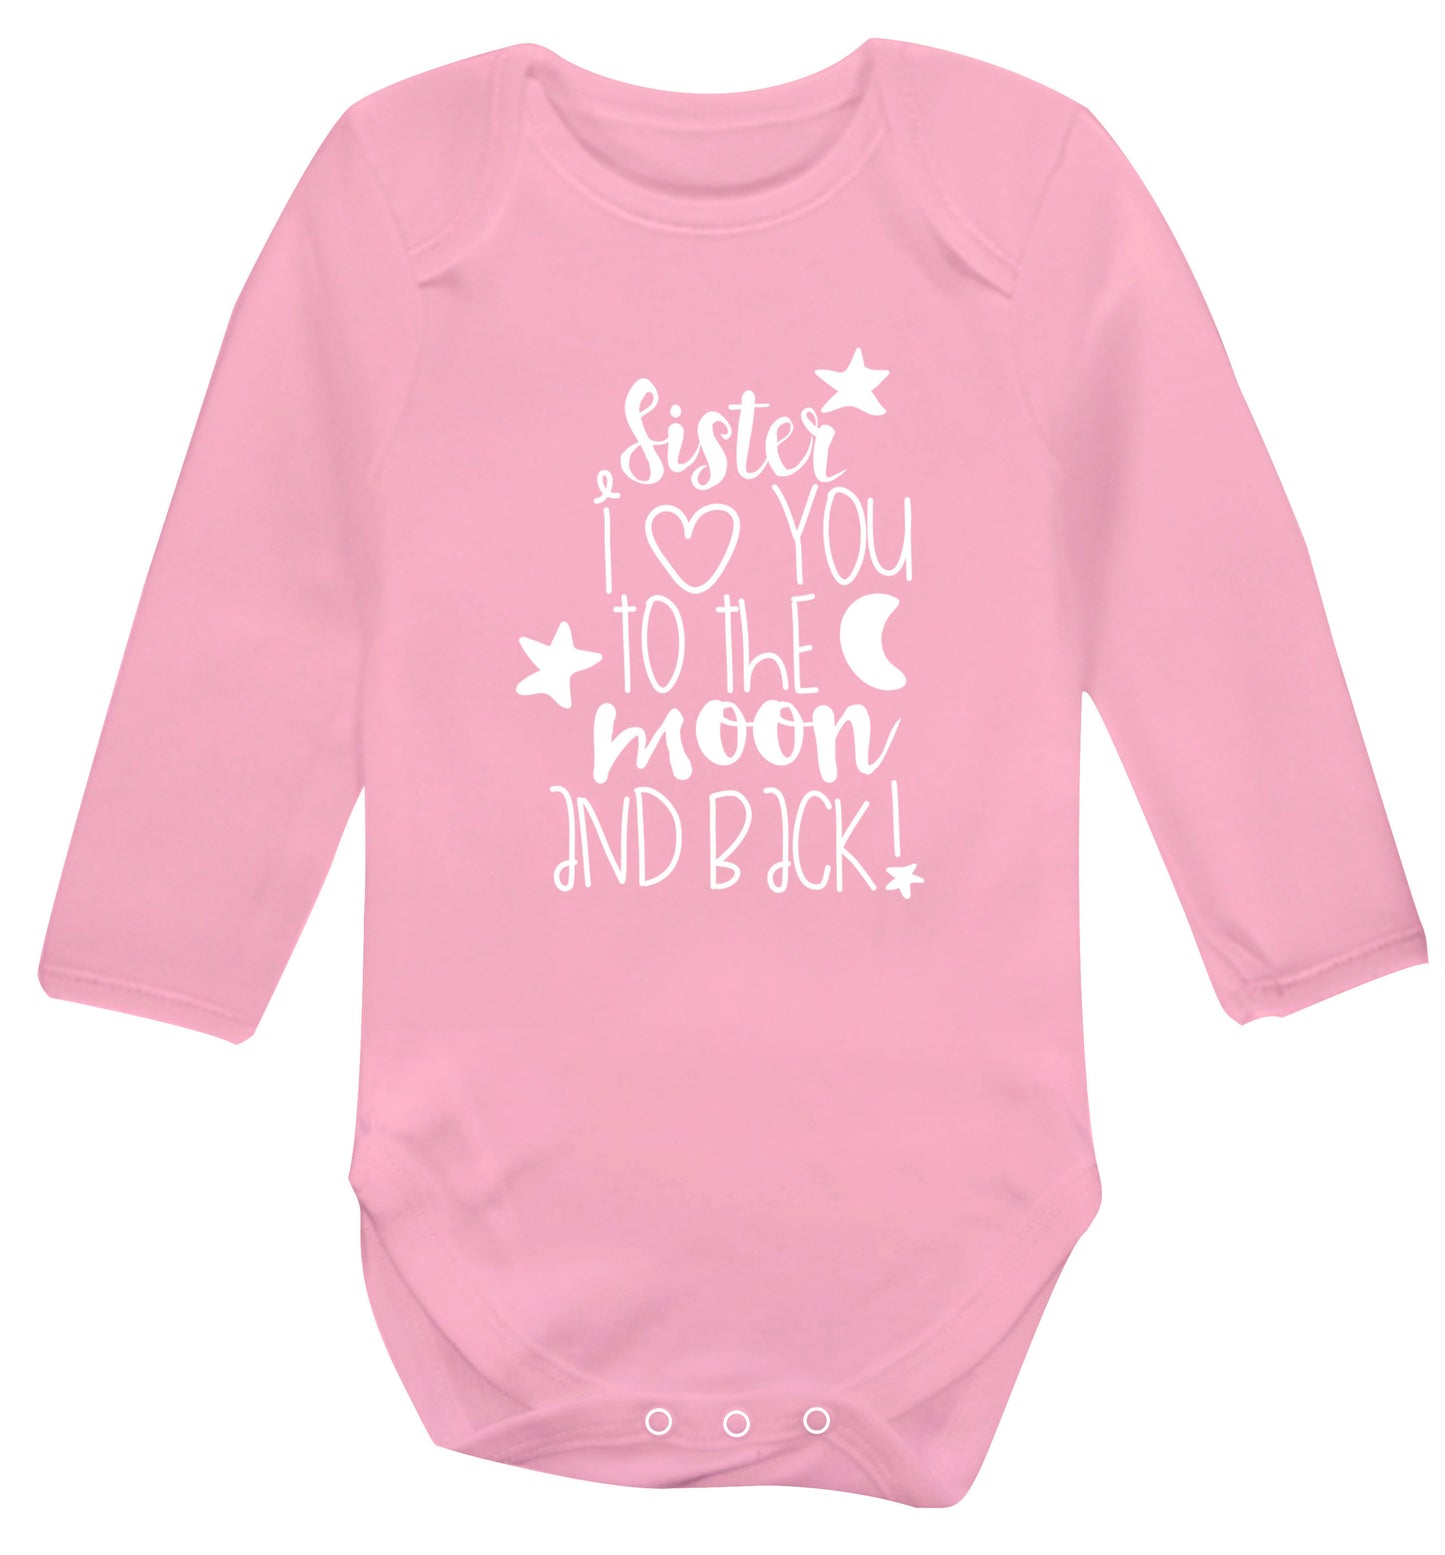 Sister I love you to the moon and back Baby Vest long sleeved pale pink 6-12 months